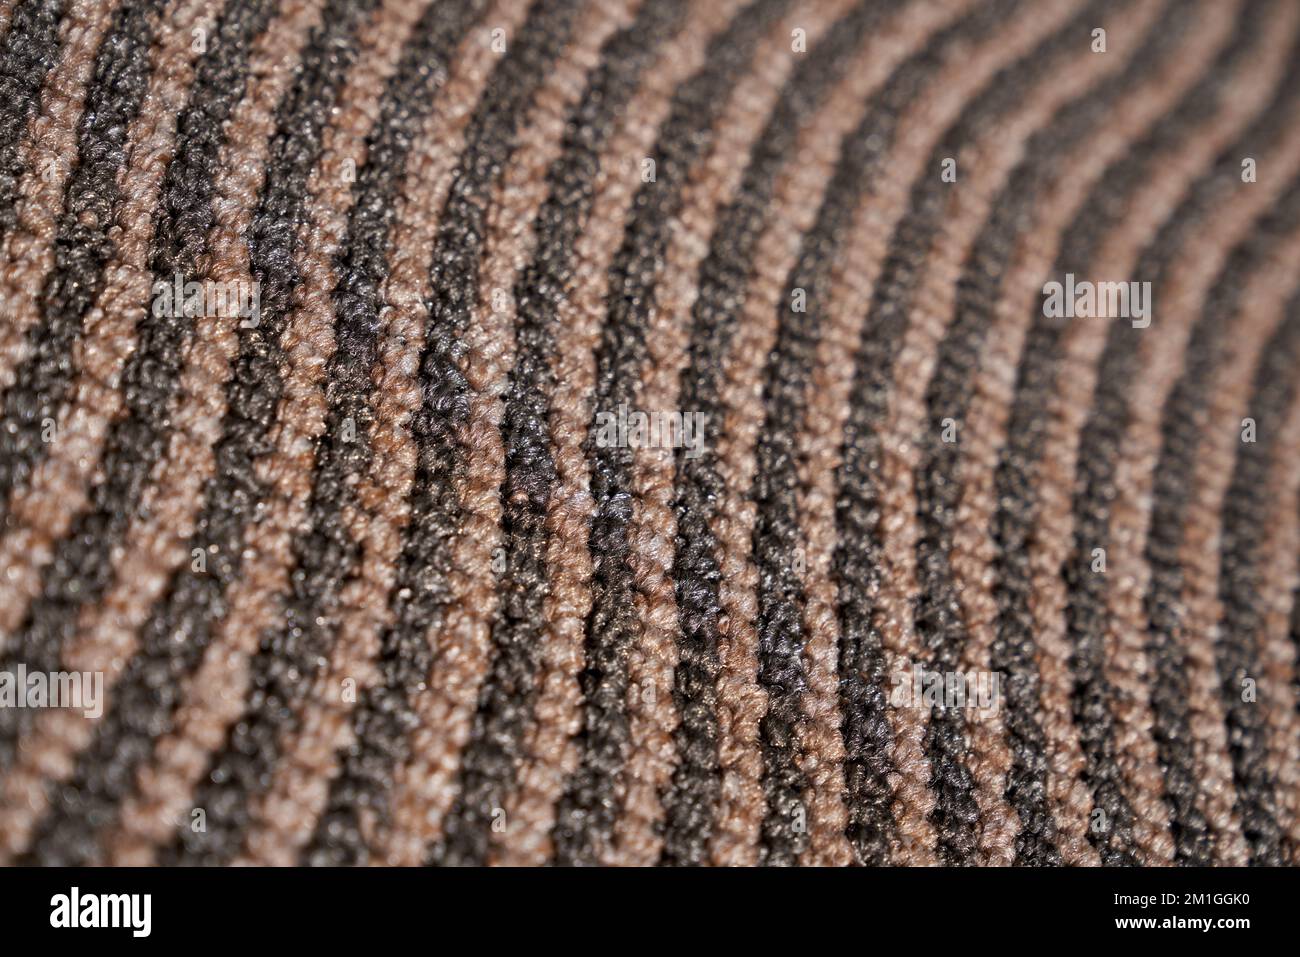 Dark relief carpet texture with asymmetric rows for unusual background. Close up view of strip pattern of synthetic tight wavy rows. Concept of textures and background. Stock Photo